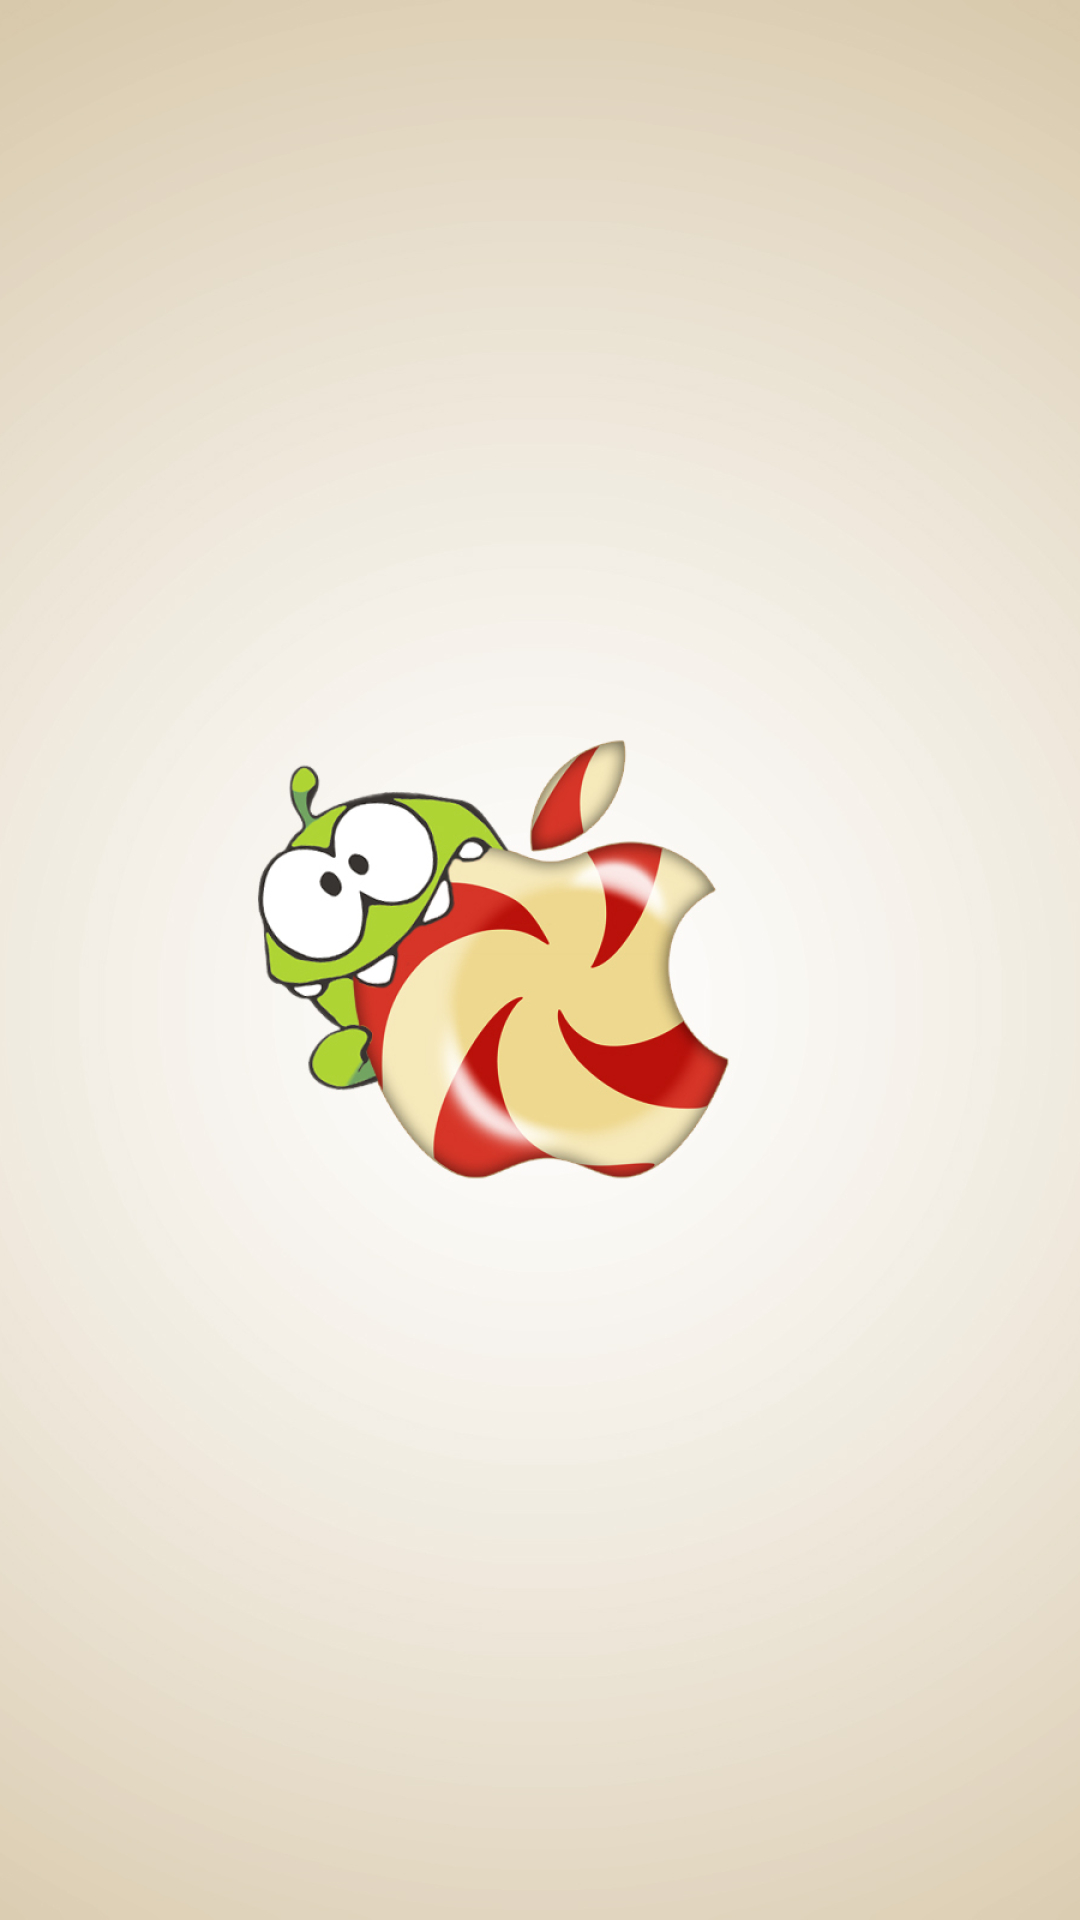 1080x1920 Om Nom Cut The Rope Art Iphone 7 6s 6 Plus And